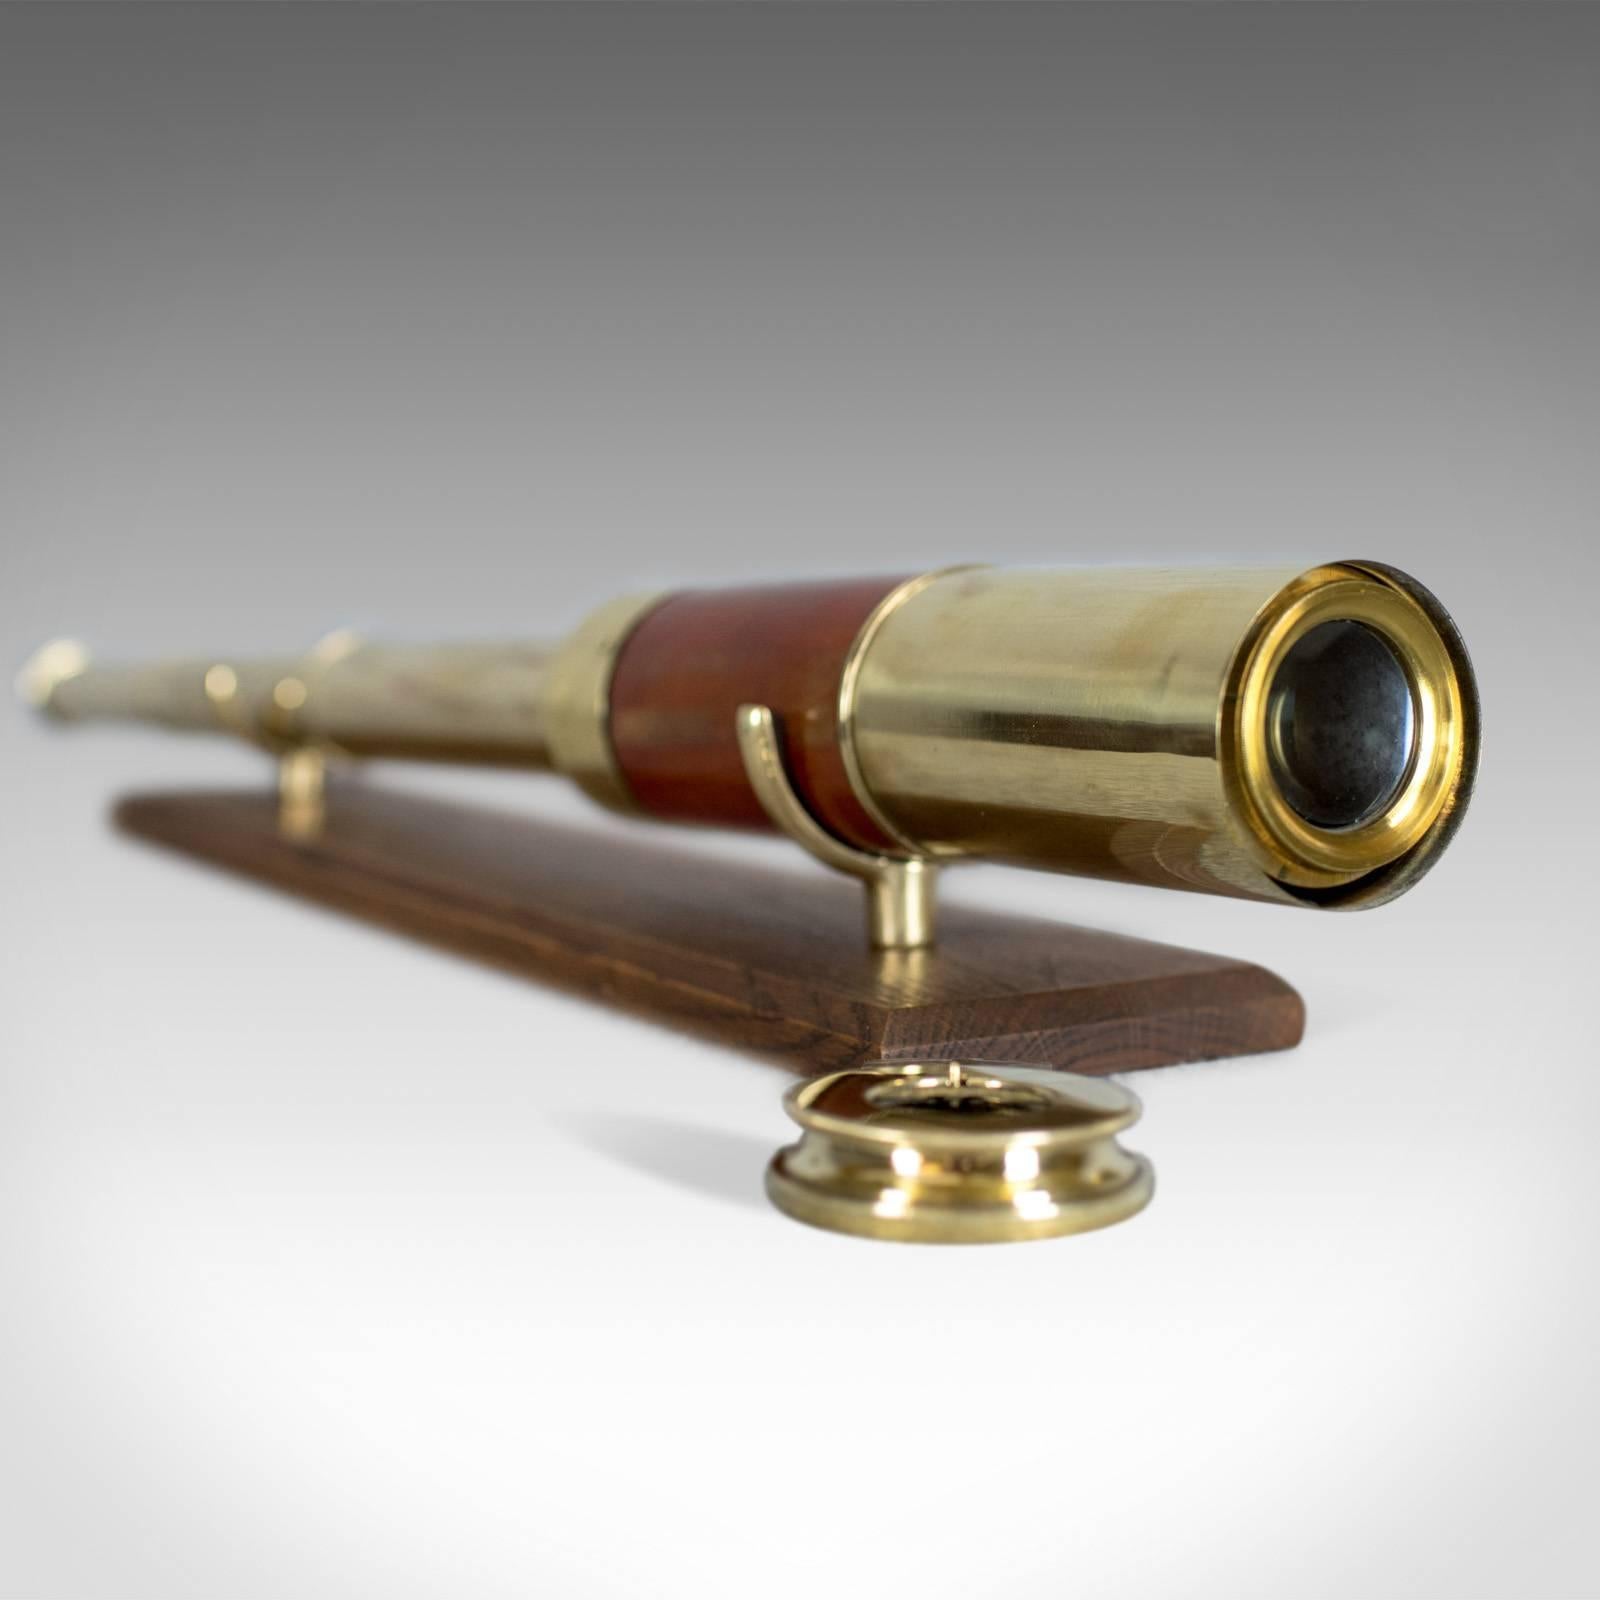 This is an antique telescope, a three-draw refractor for terrestrial or astronomical use. An English, late Georgian piece dating to circa 1780.

Perfect for bird watching, landscape appreciation, wildlife, or maritime observation. Equally suitable